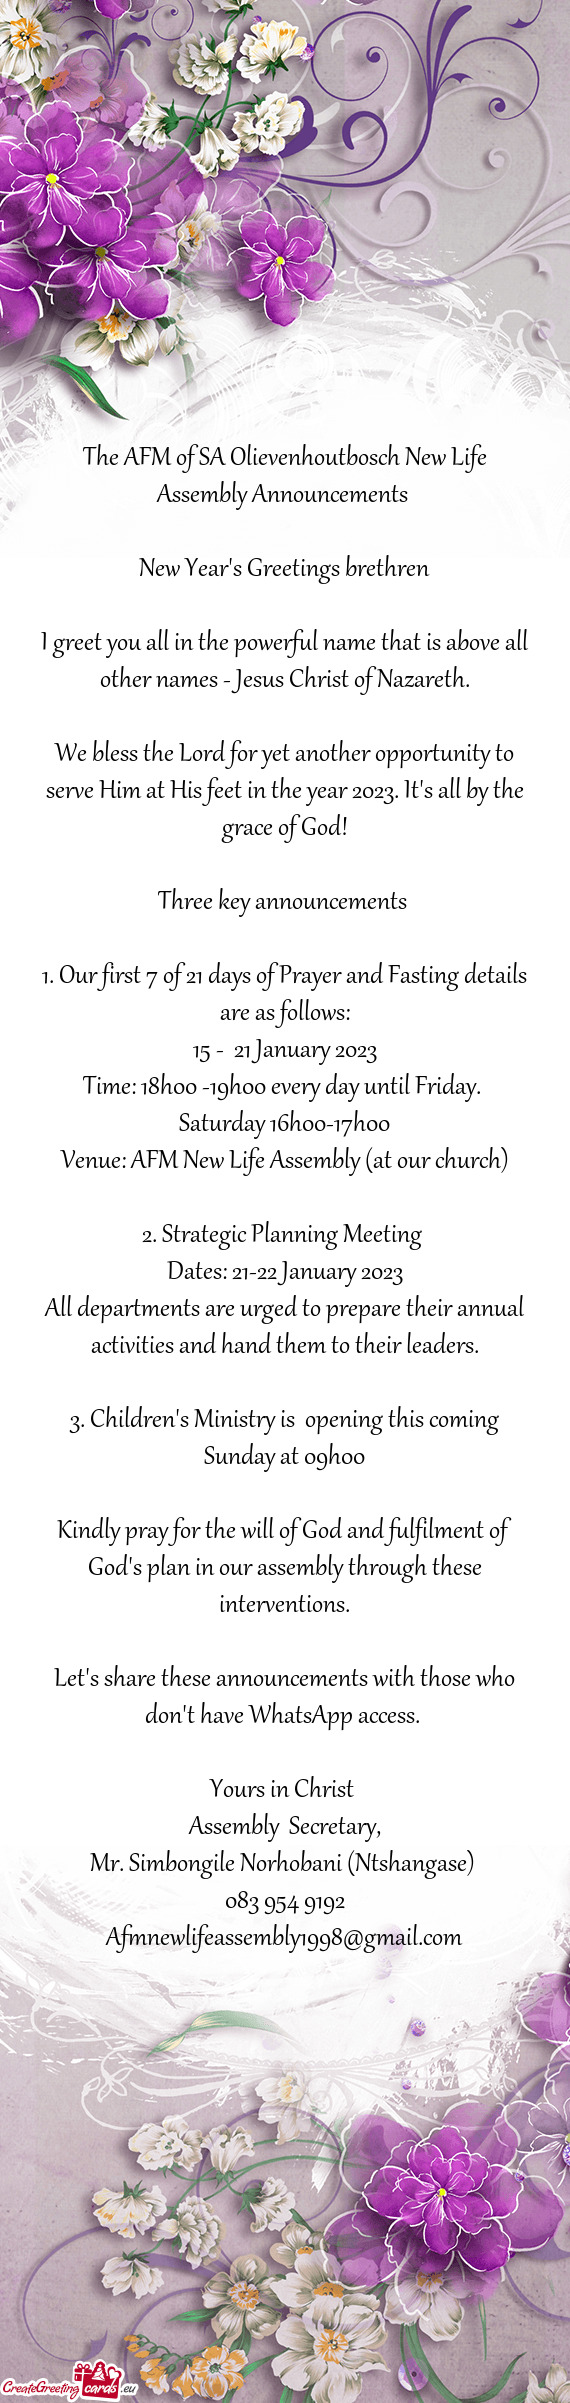 The AFM of SA Olievenhoutbosch New Life Assembly Announcements